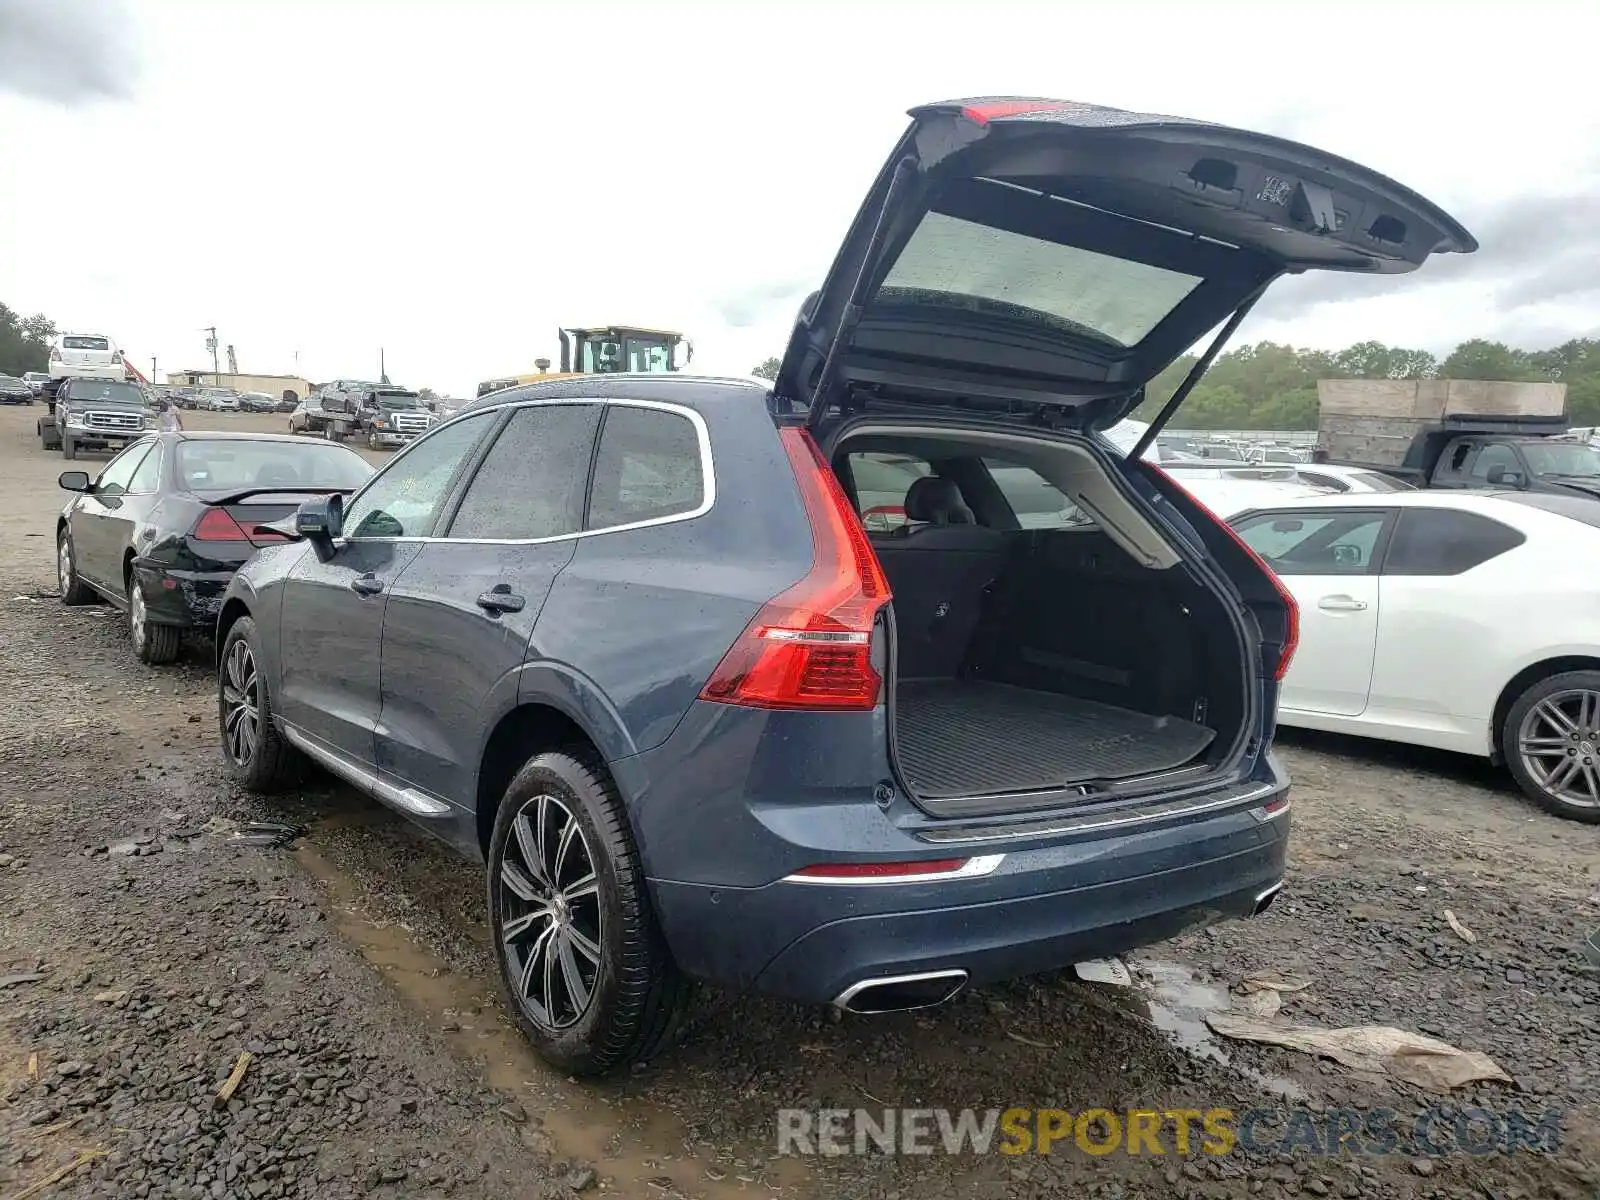 3 Photograph of a damaged car LYVA22RLXKB335151 VOLVO XC60 T6 IN 2019